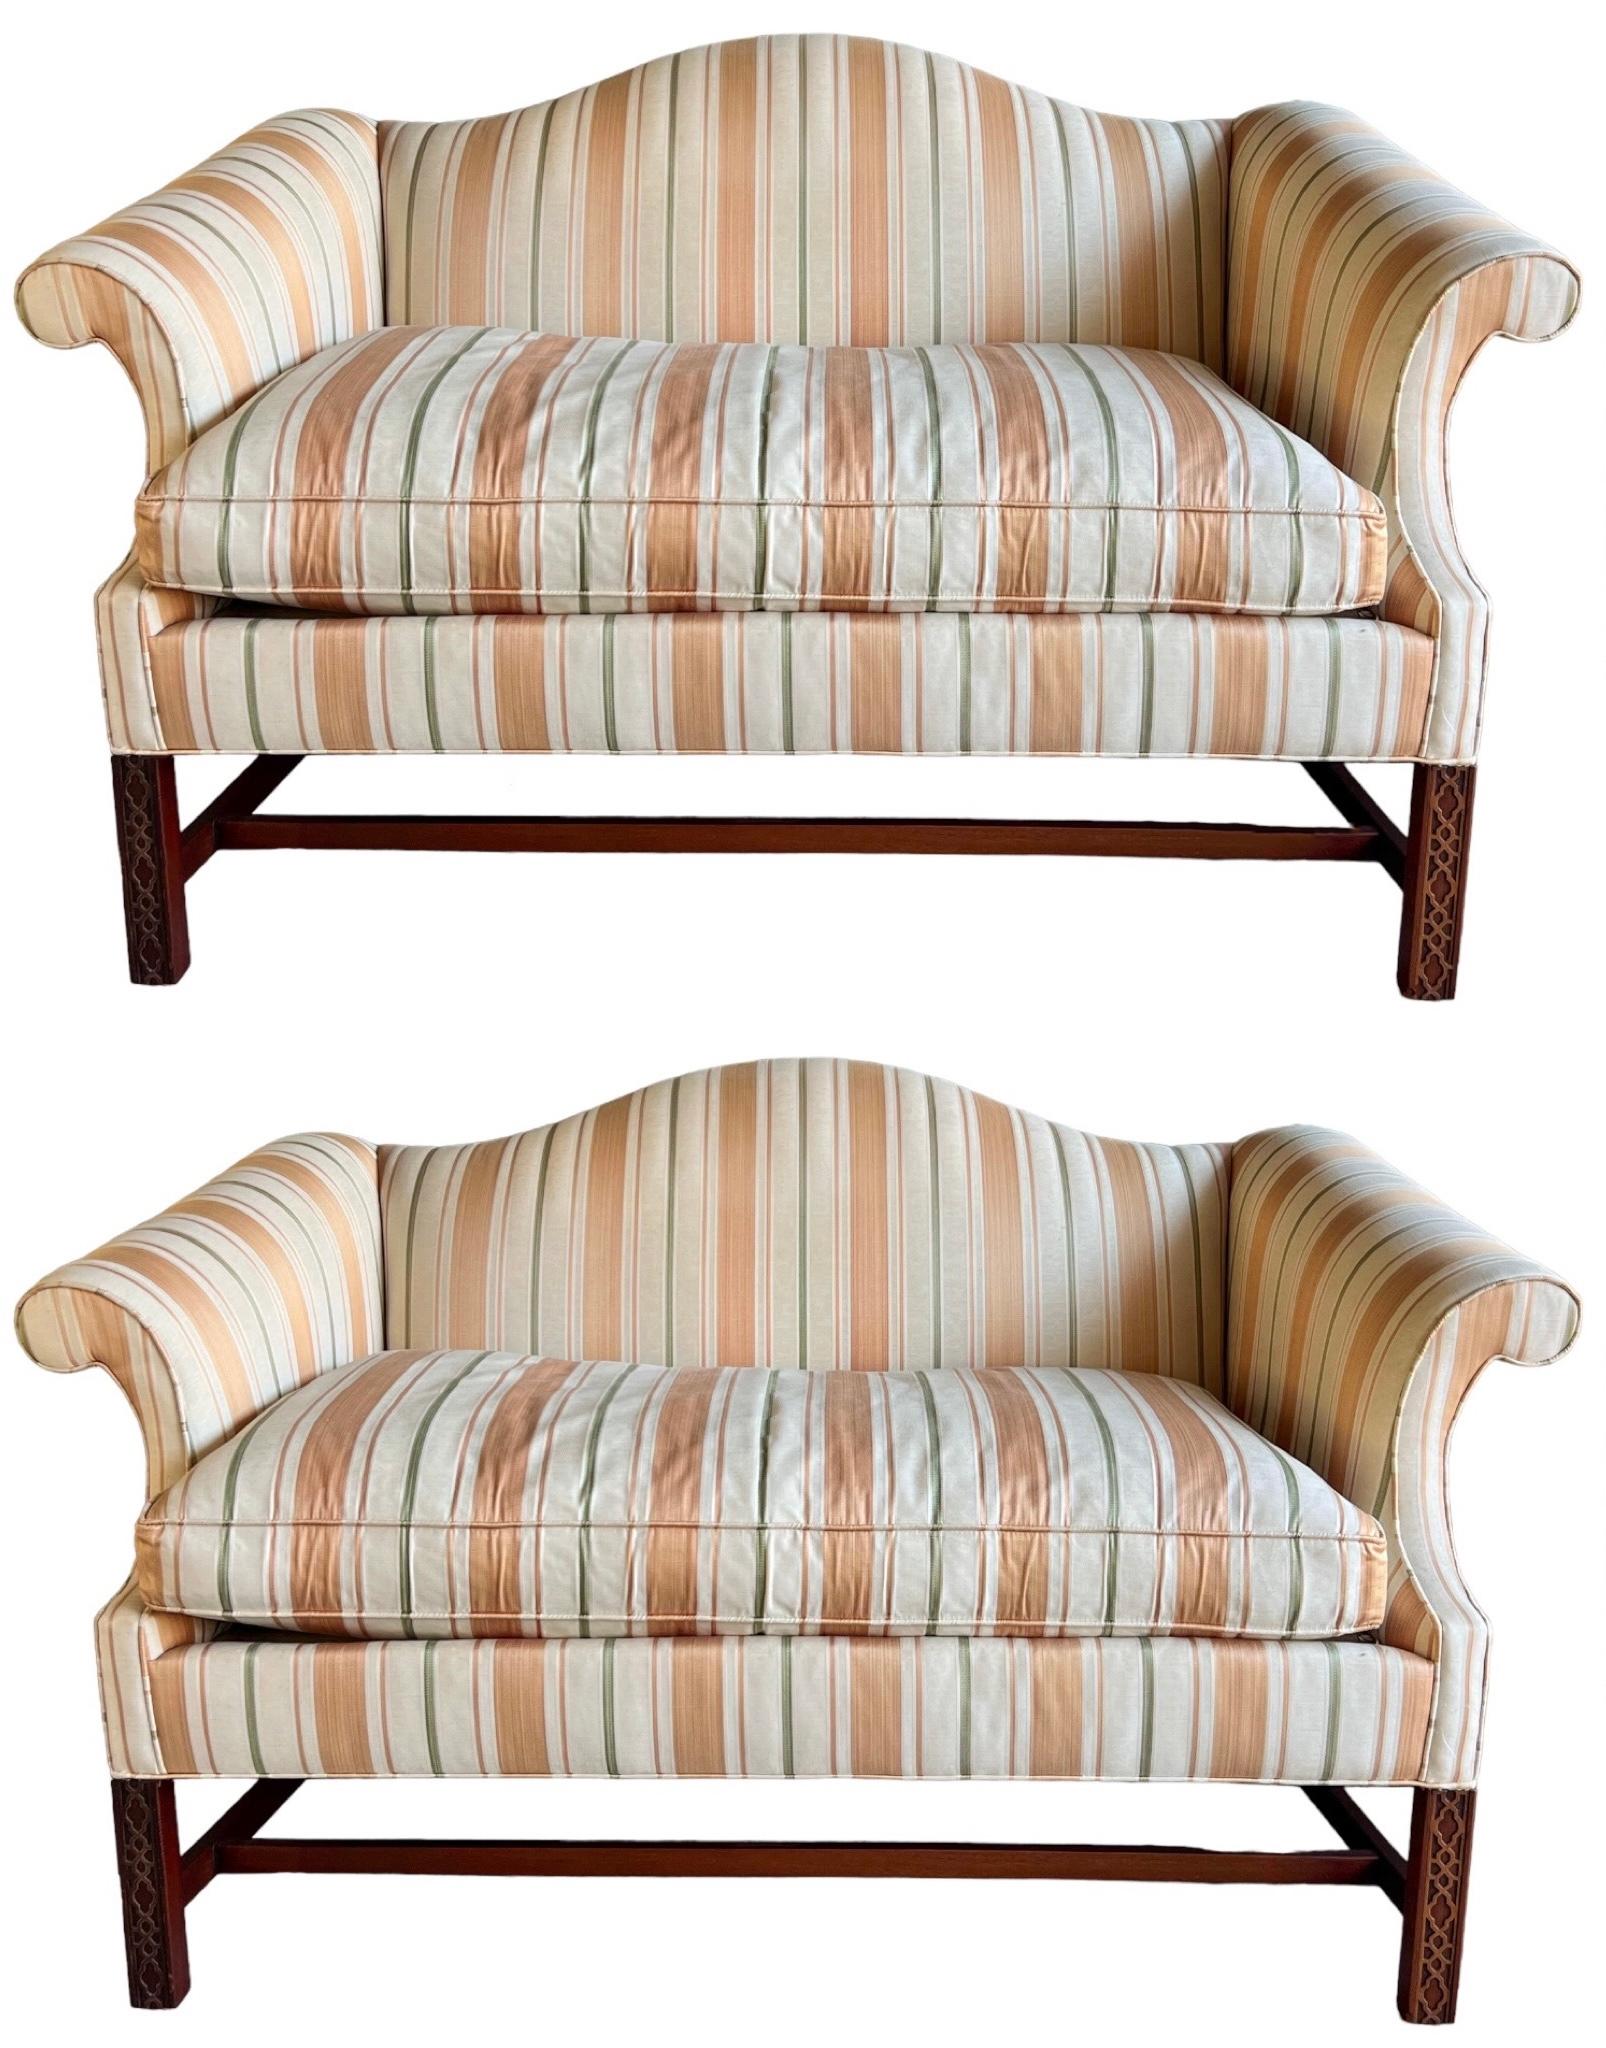 Chinese Chippendale Style Settees / Sofas W/ Mahogany Frame By Southwood - Pair 1